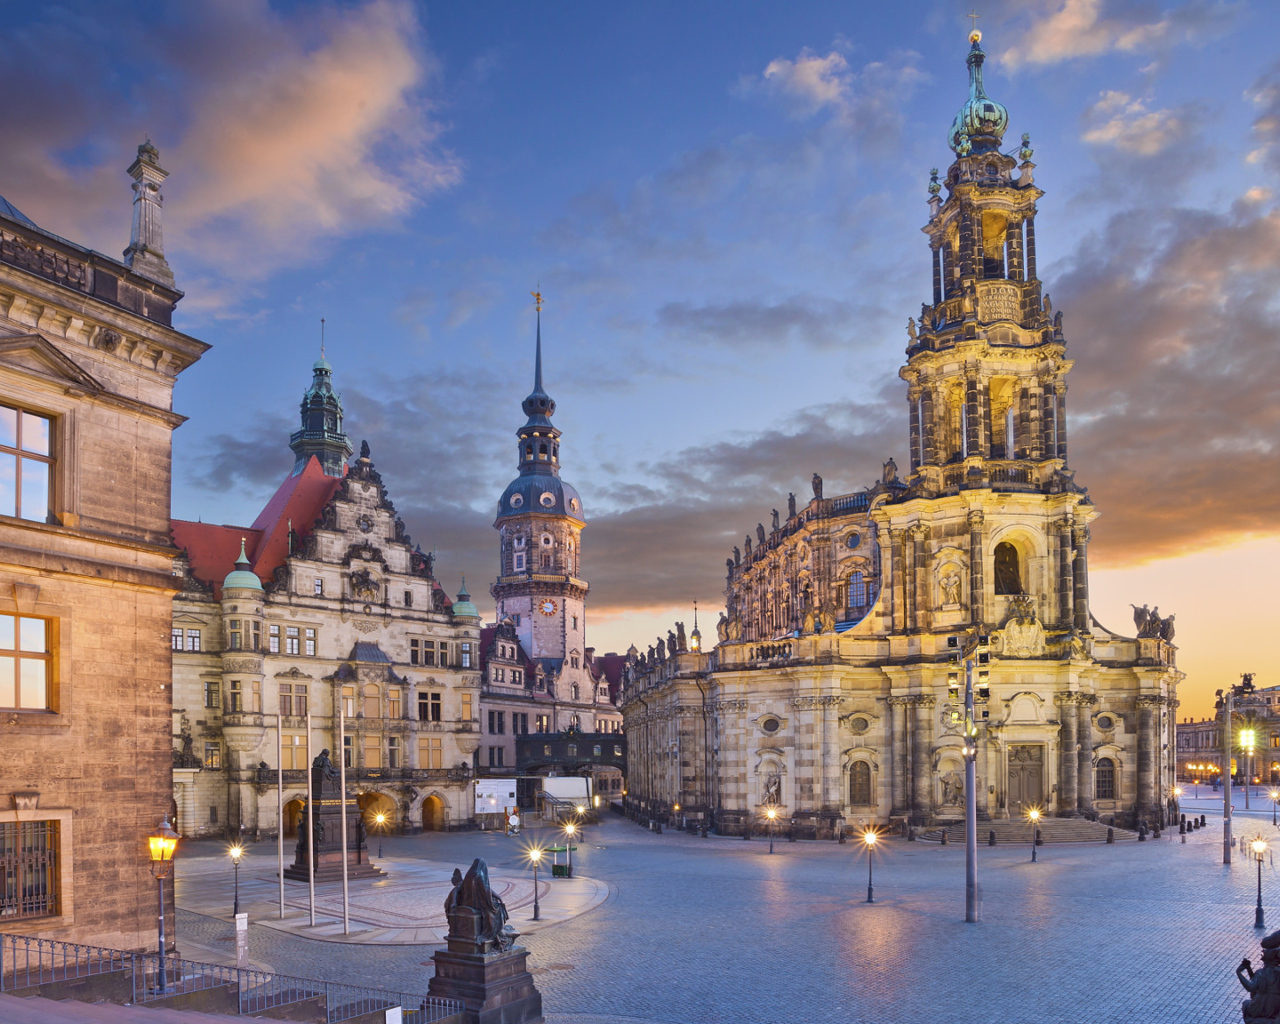 The ancient architecture of Dresden, Germany